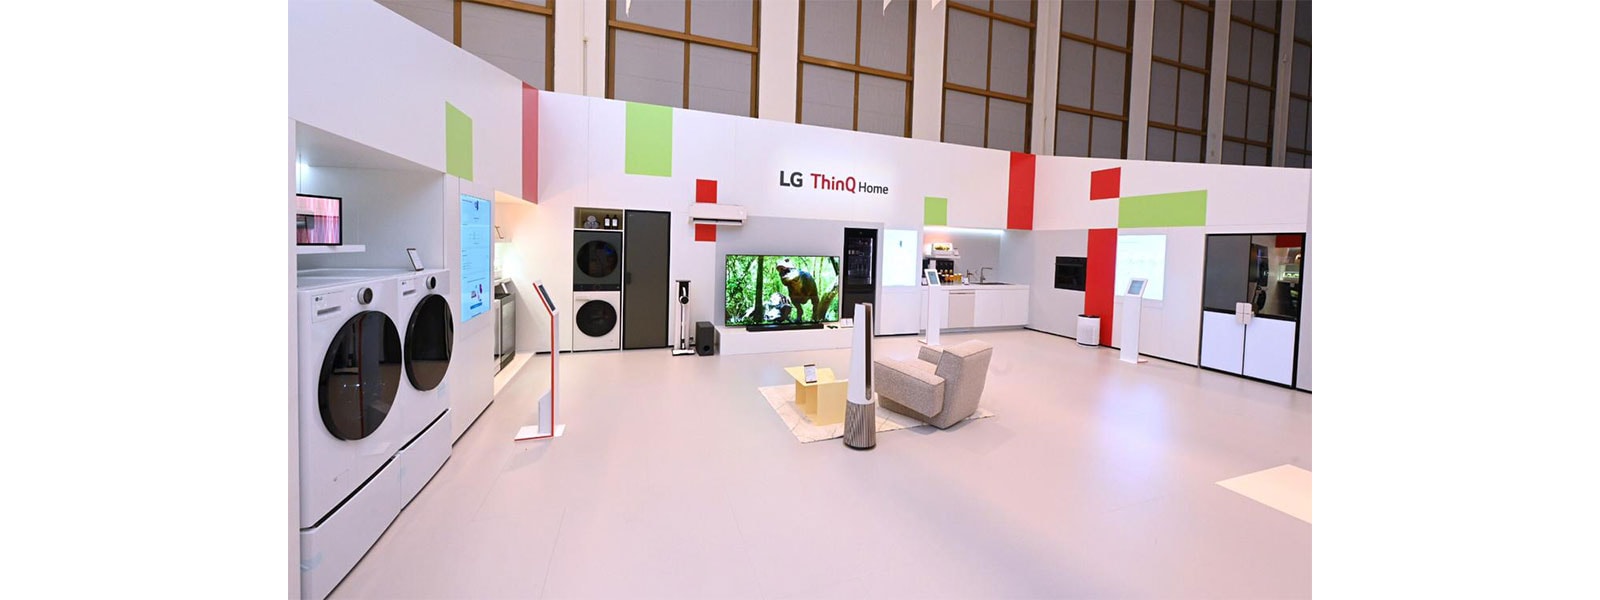 LG ‘SUSTAINABLE LIFE, JOY FOR ALL’ With Latest Home Solutions at IFA